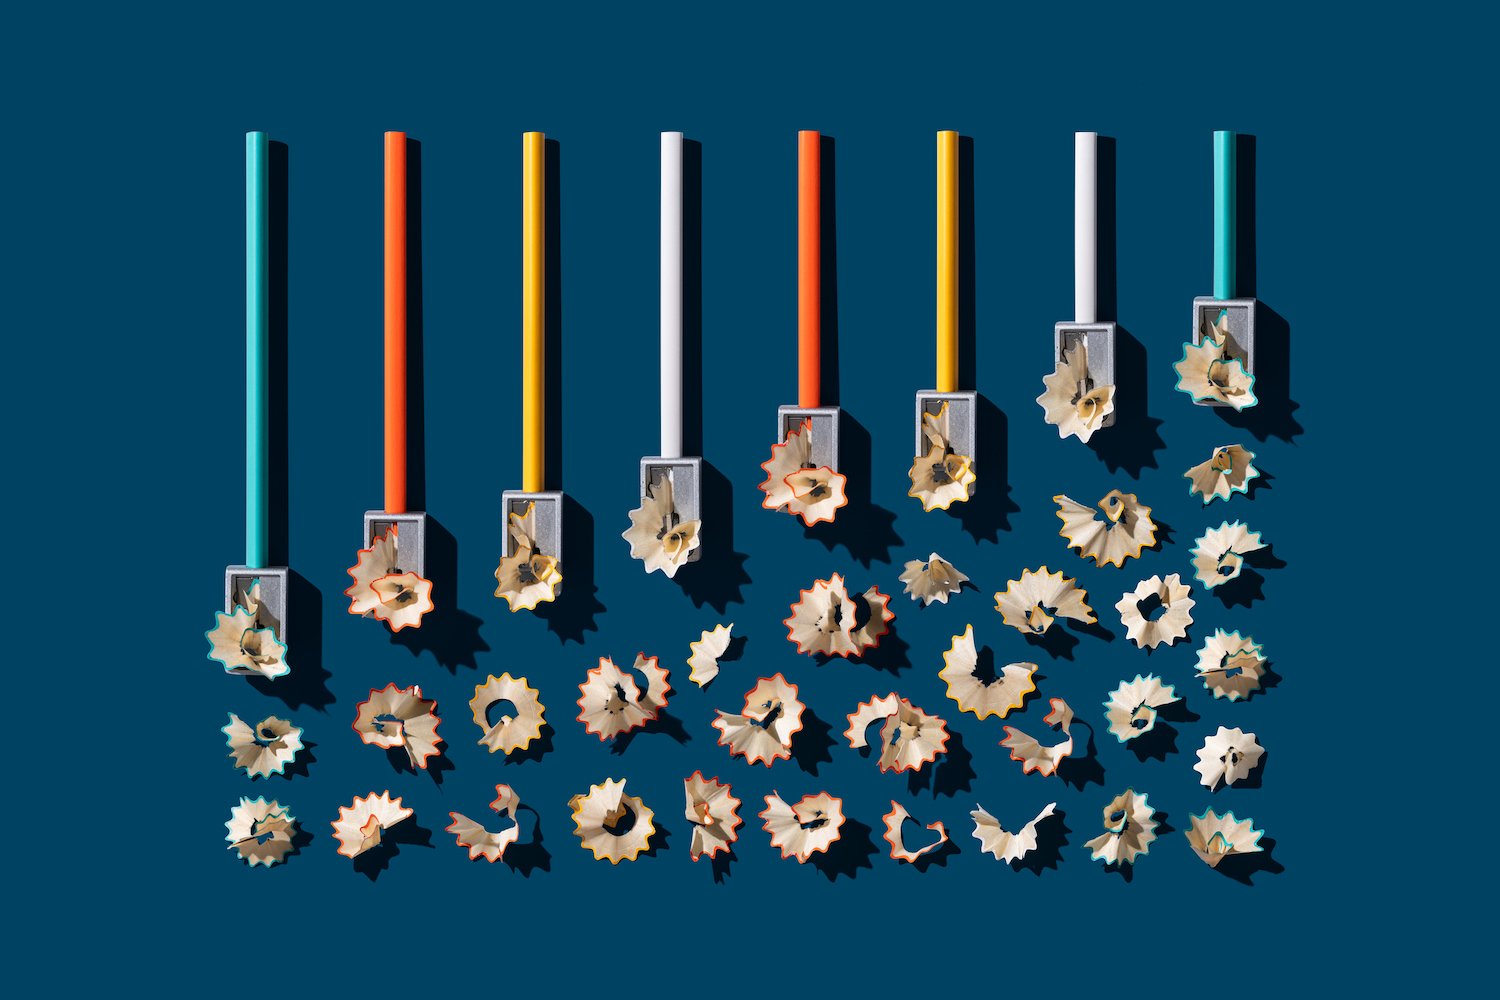 Pencil Sharpener Sharpening Pencils with Pencil Shavings on Solid Blue Colored Background.